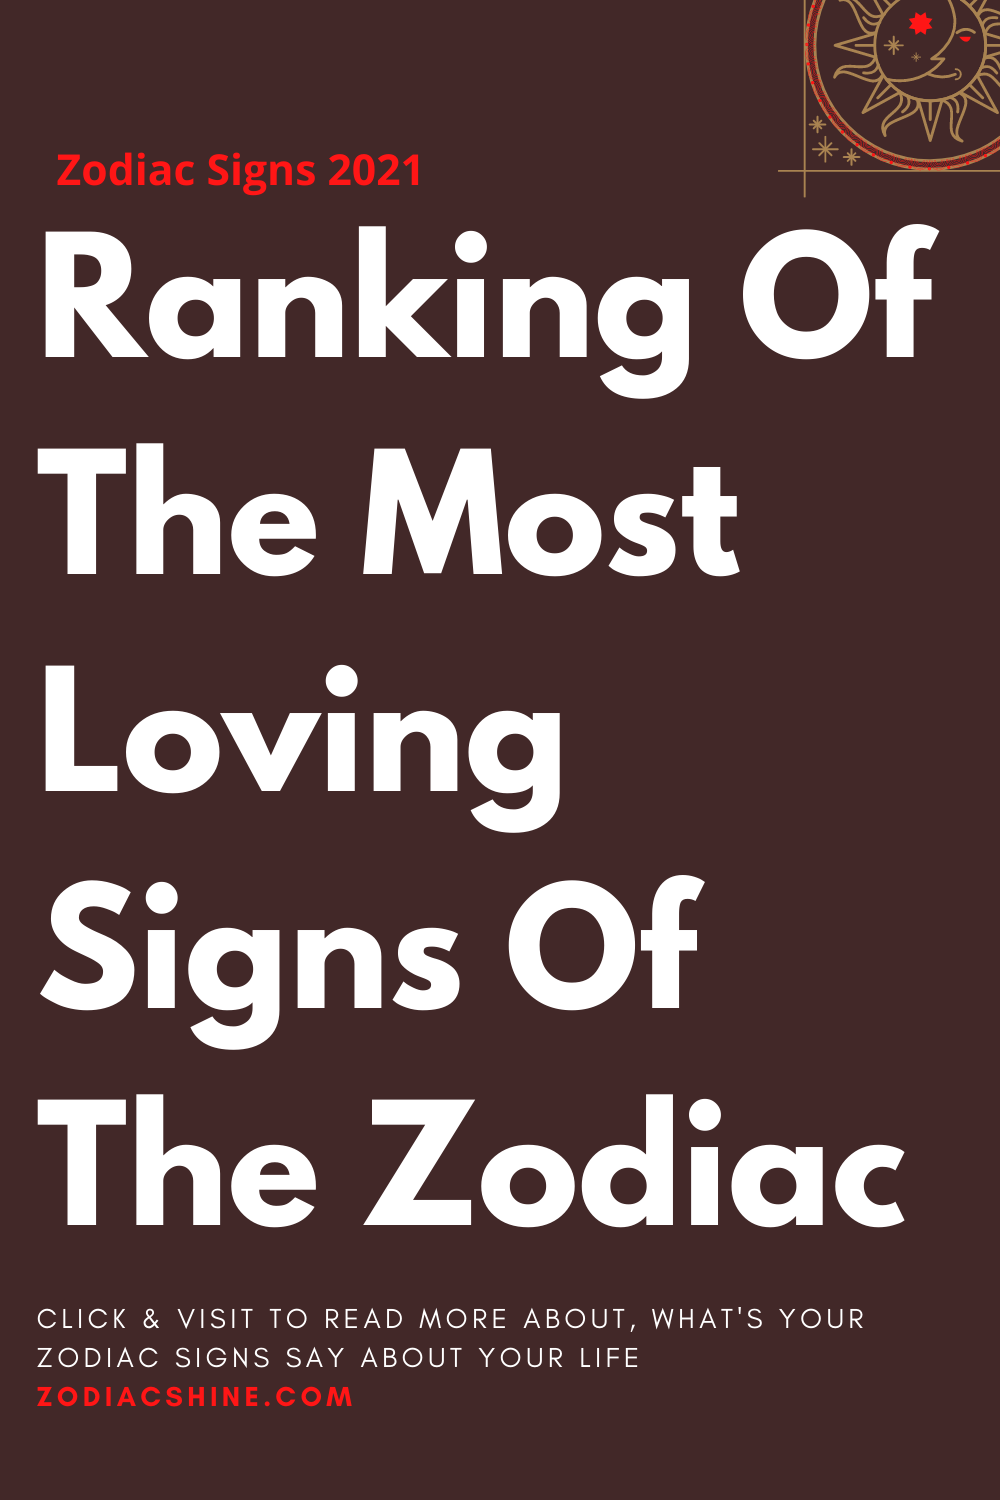 Ranking Of The Most Loving Signs Of The Zodiac